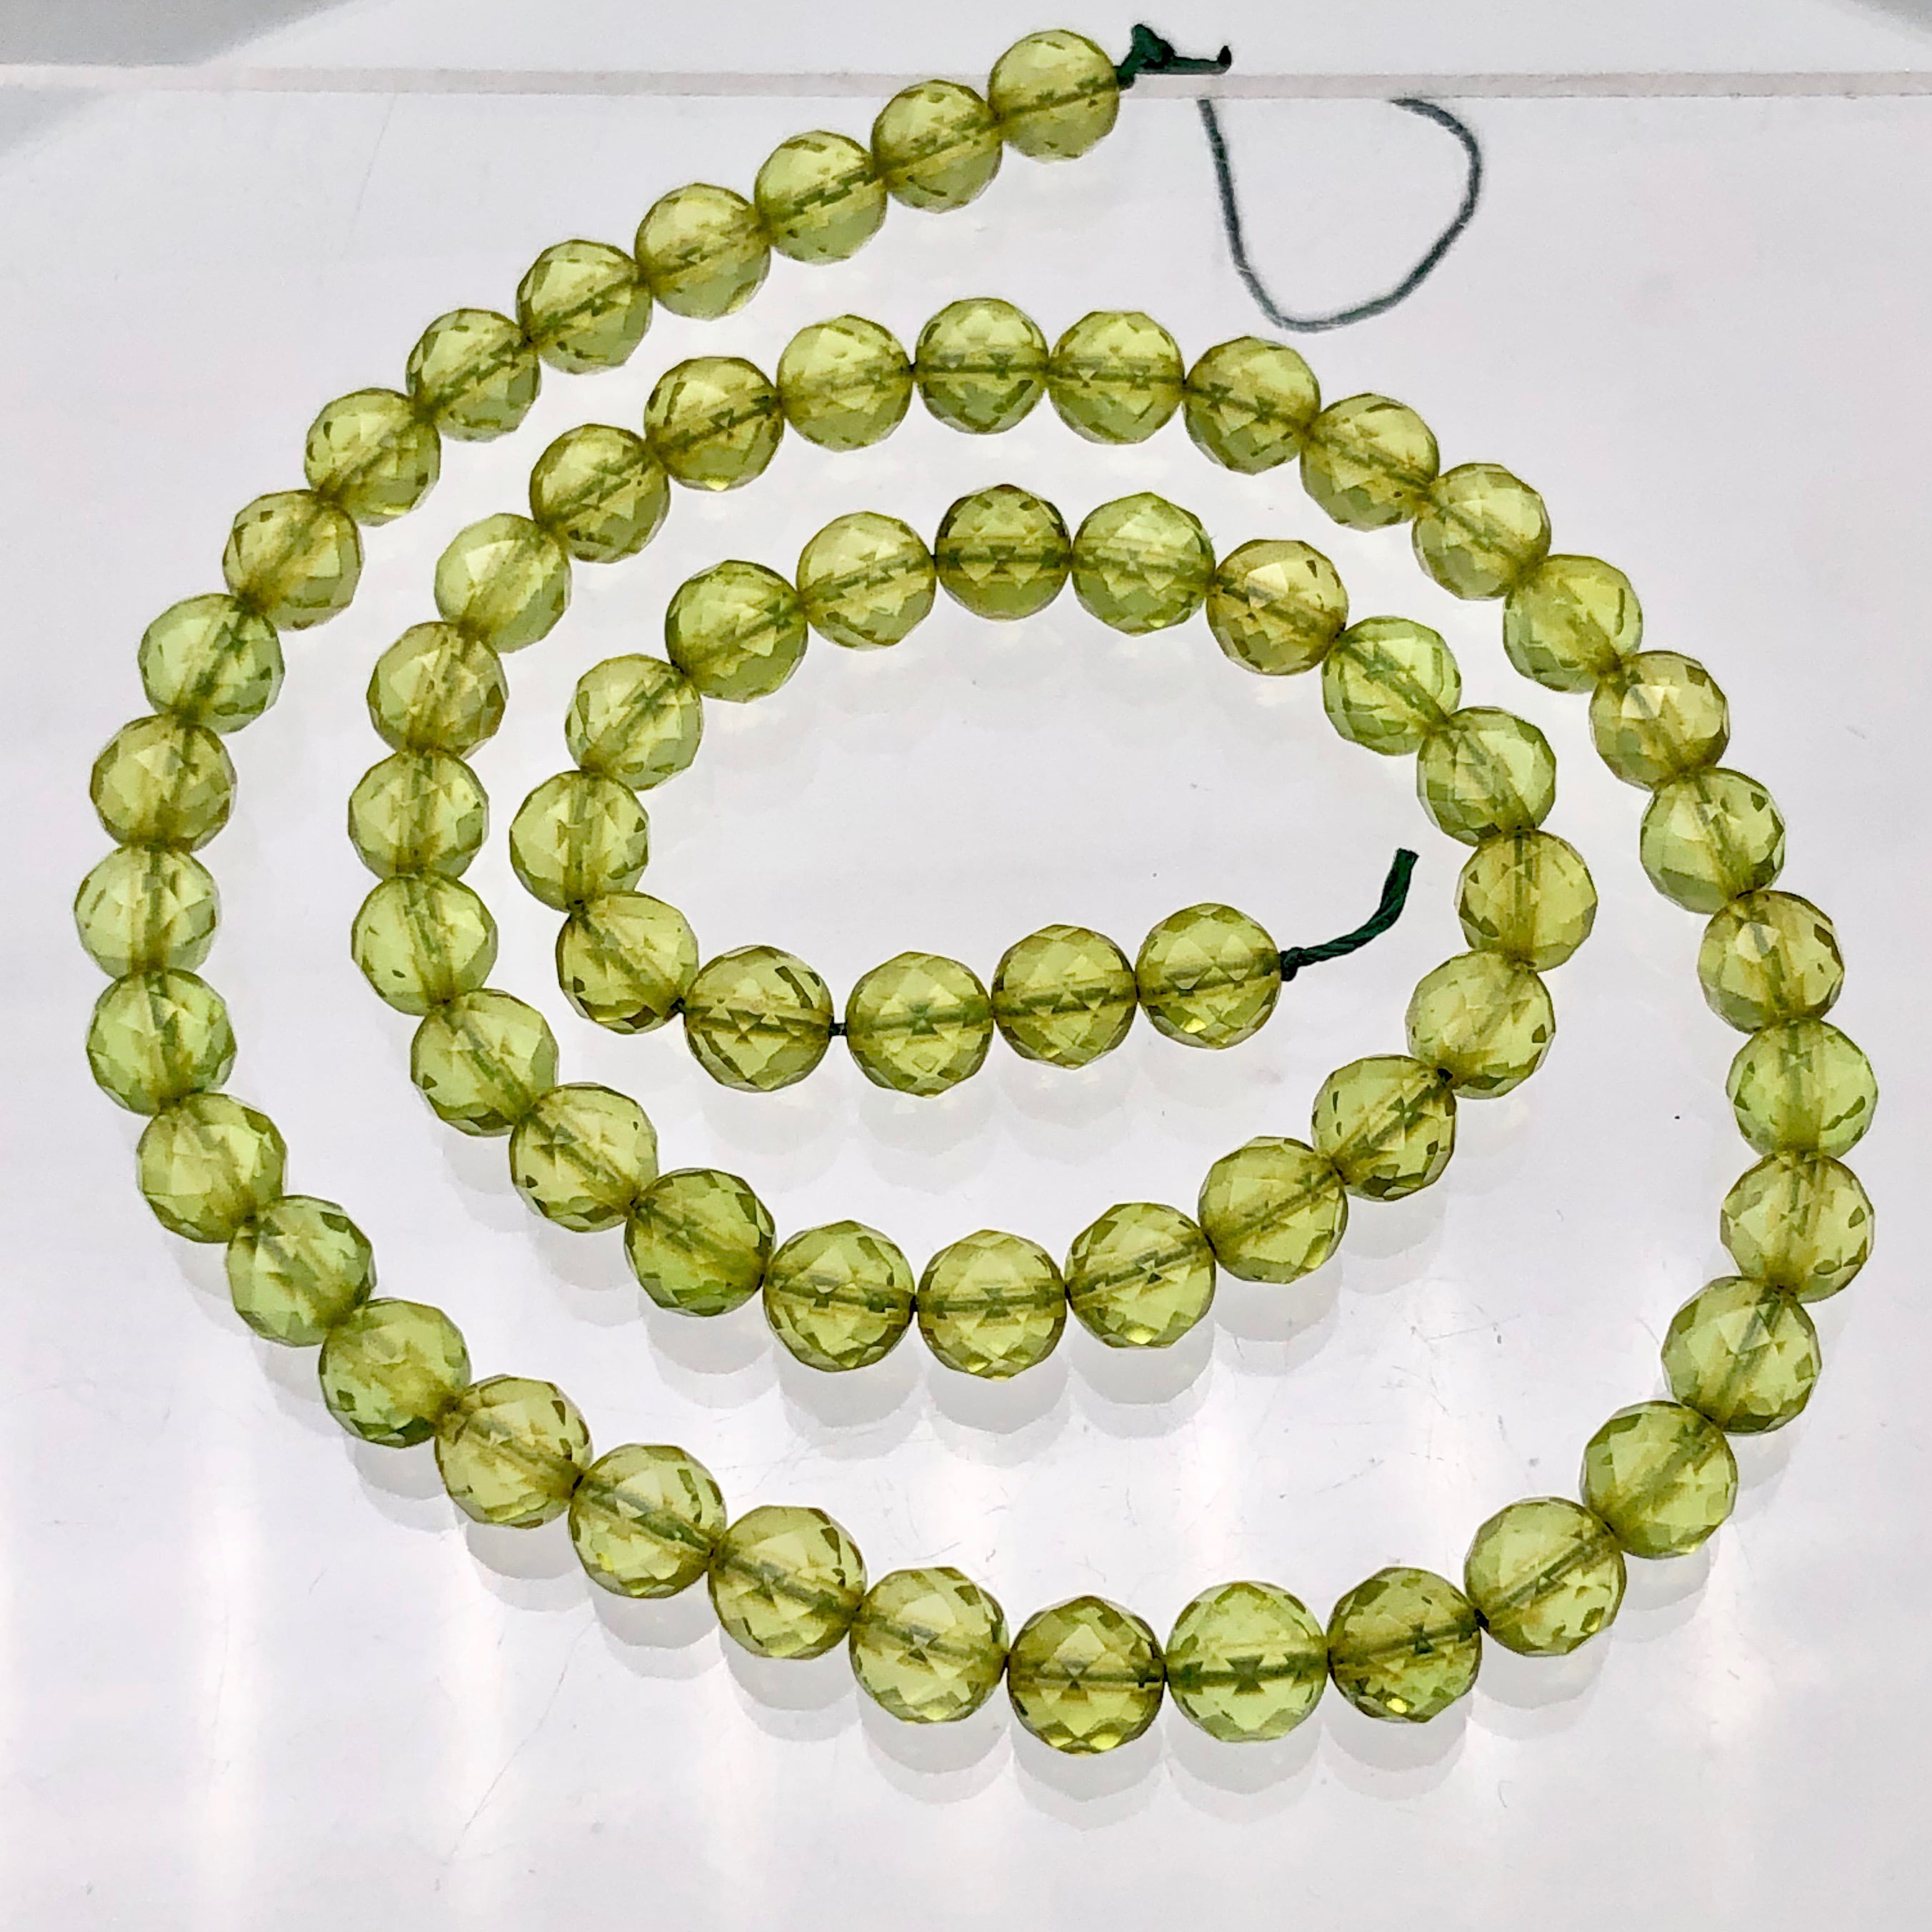 20 Gold Metallic Faceted Geometric Wood Beads 20mm with 4.2mm Large Hole 